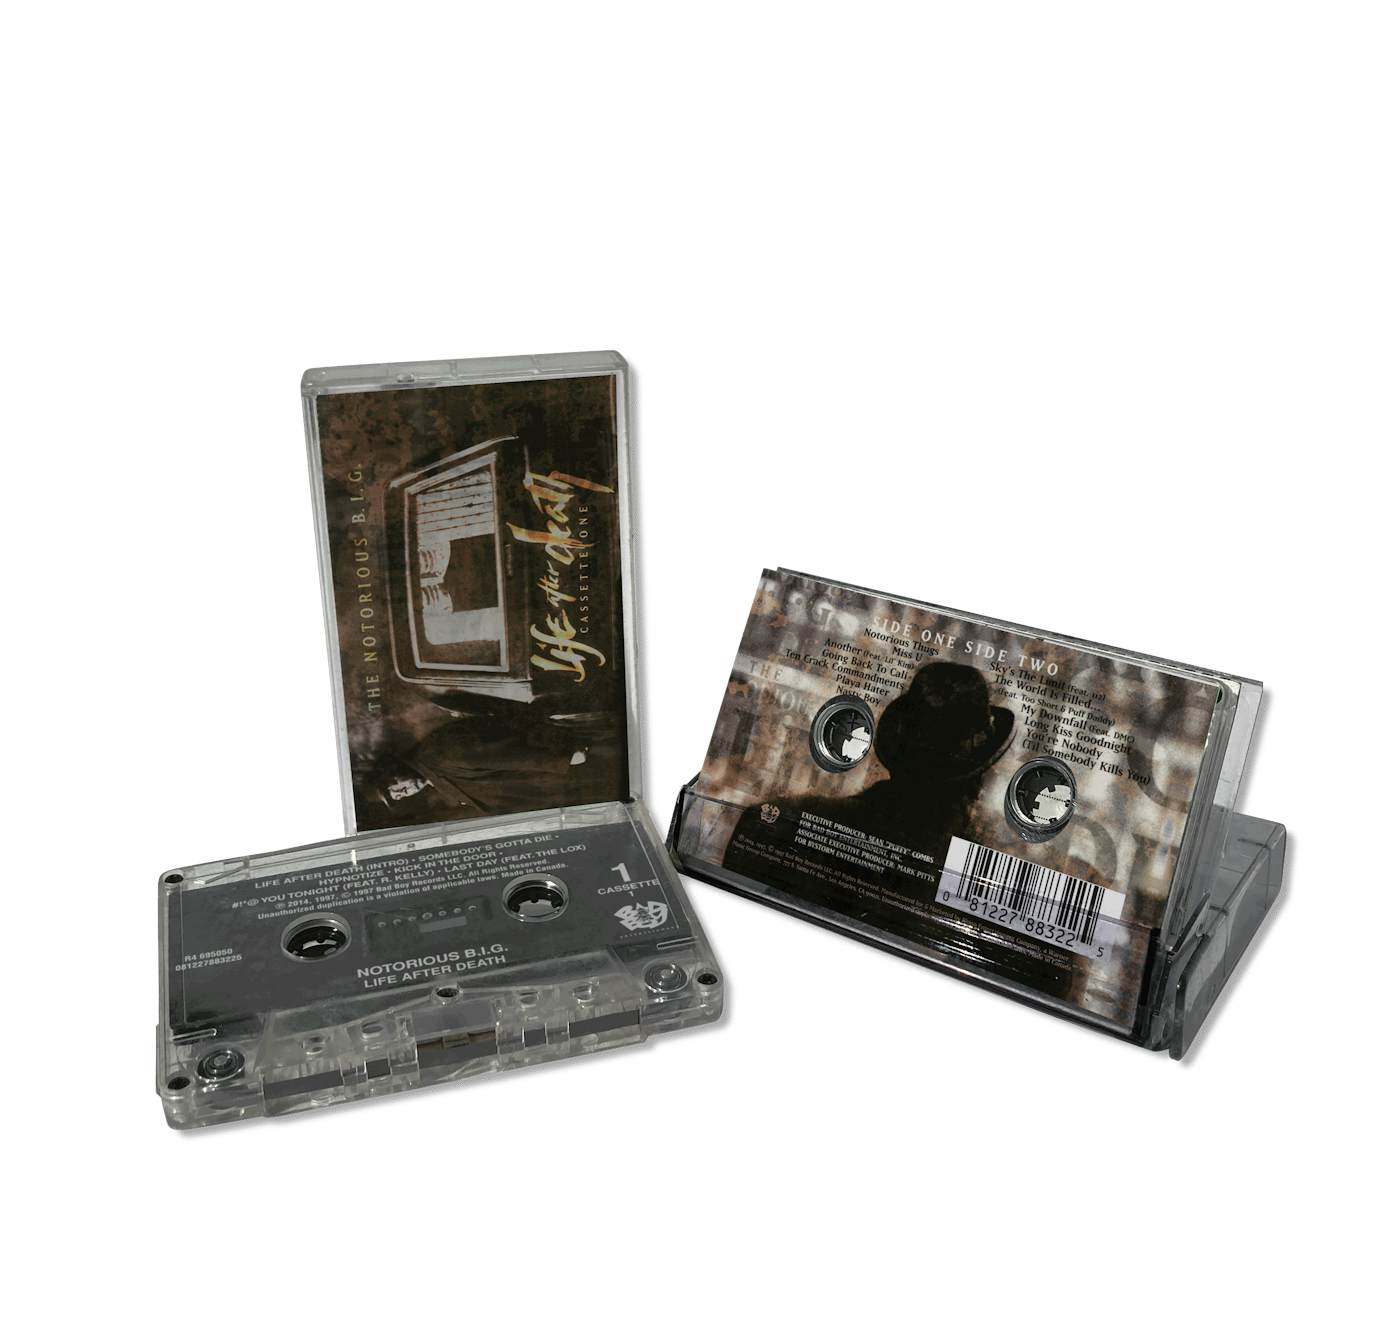 The Notorious B.I.G. Life After Death Double Cassette $34.98